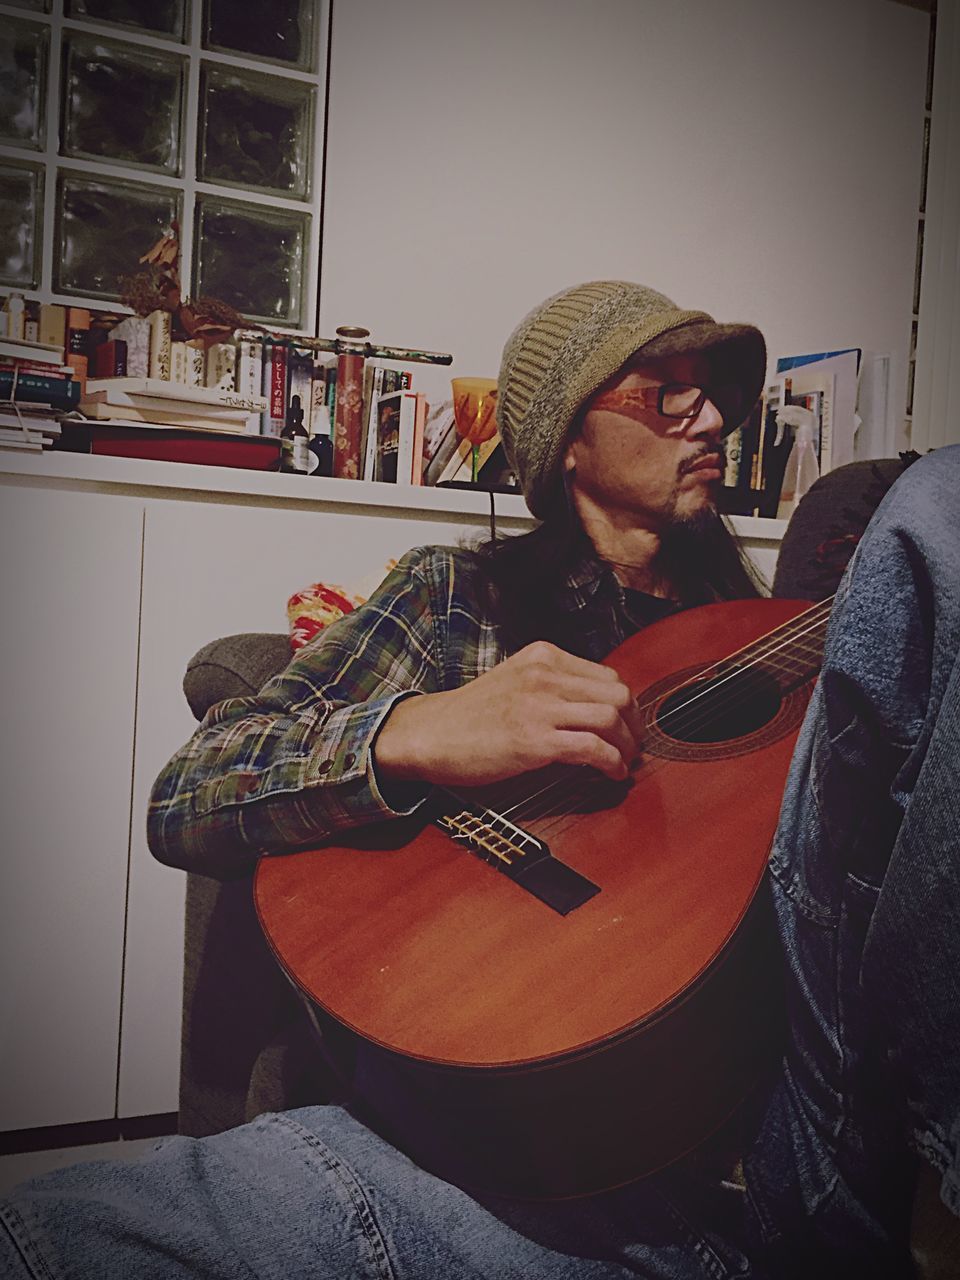 hat, guitar, music, sitting, lifestyles, plucking an instrument, musical instrument, beard, playing, men, home interior, string instrument, only men, one person, adults only, indoors, real people, adult, one man only, musician, people, day